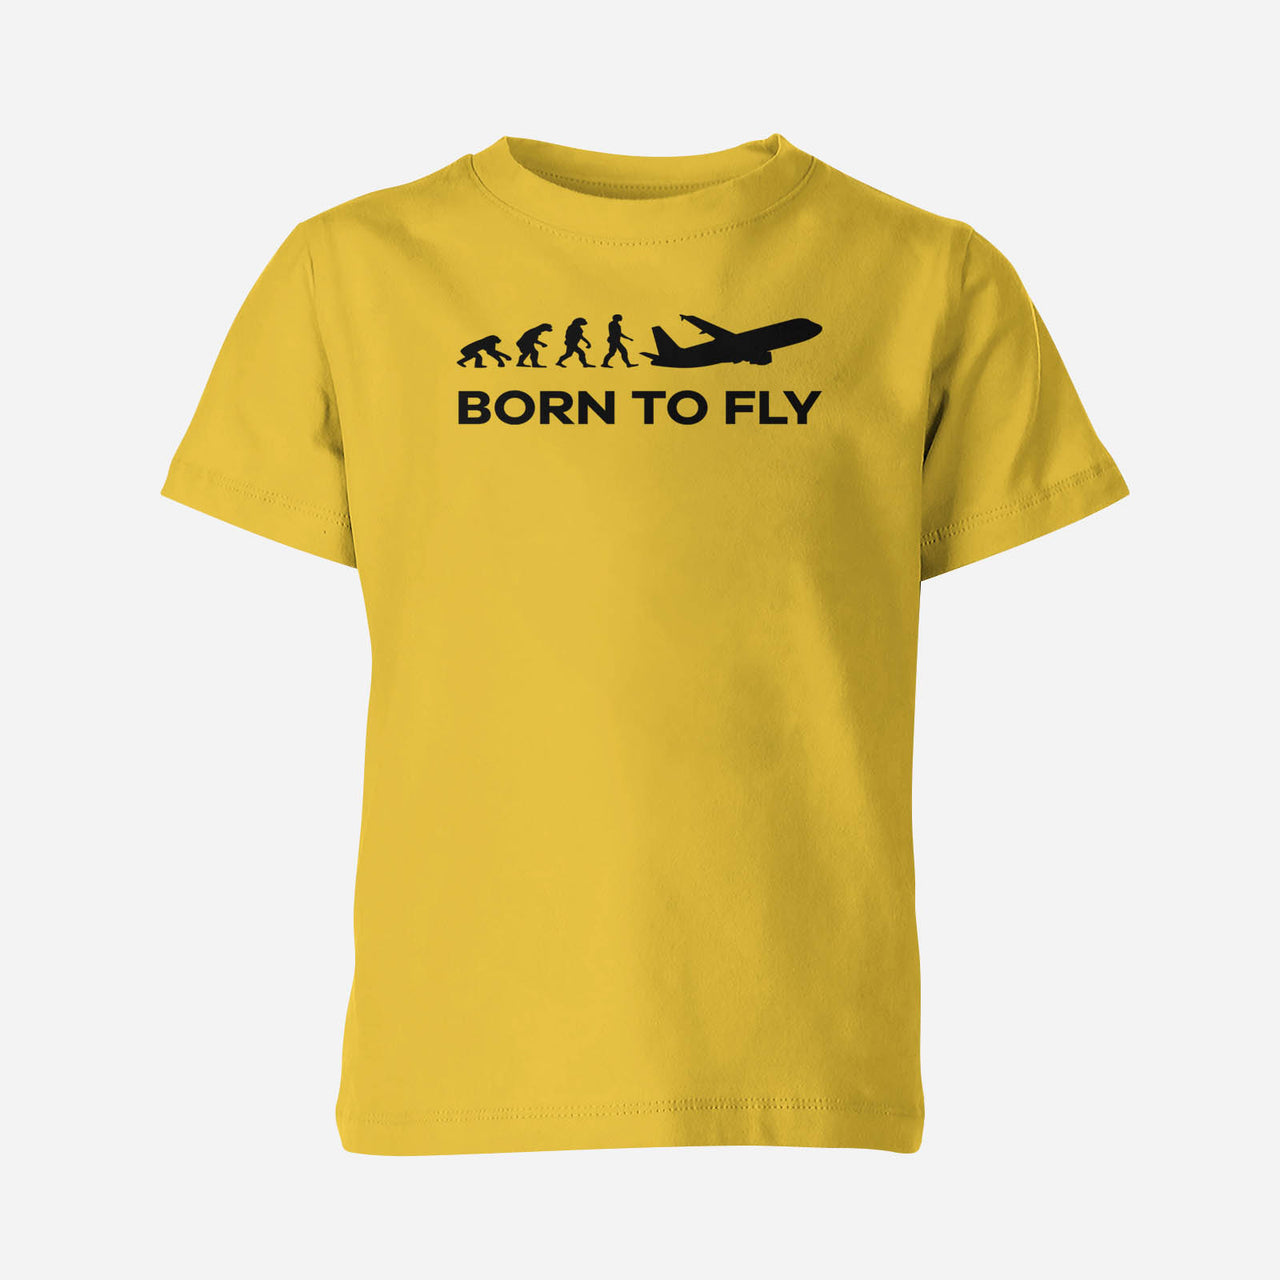 Born To Fly Designed Children T-Shirts